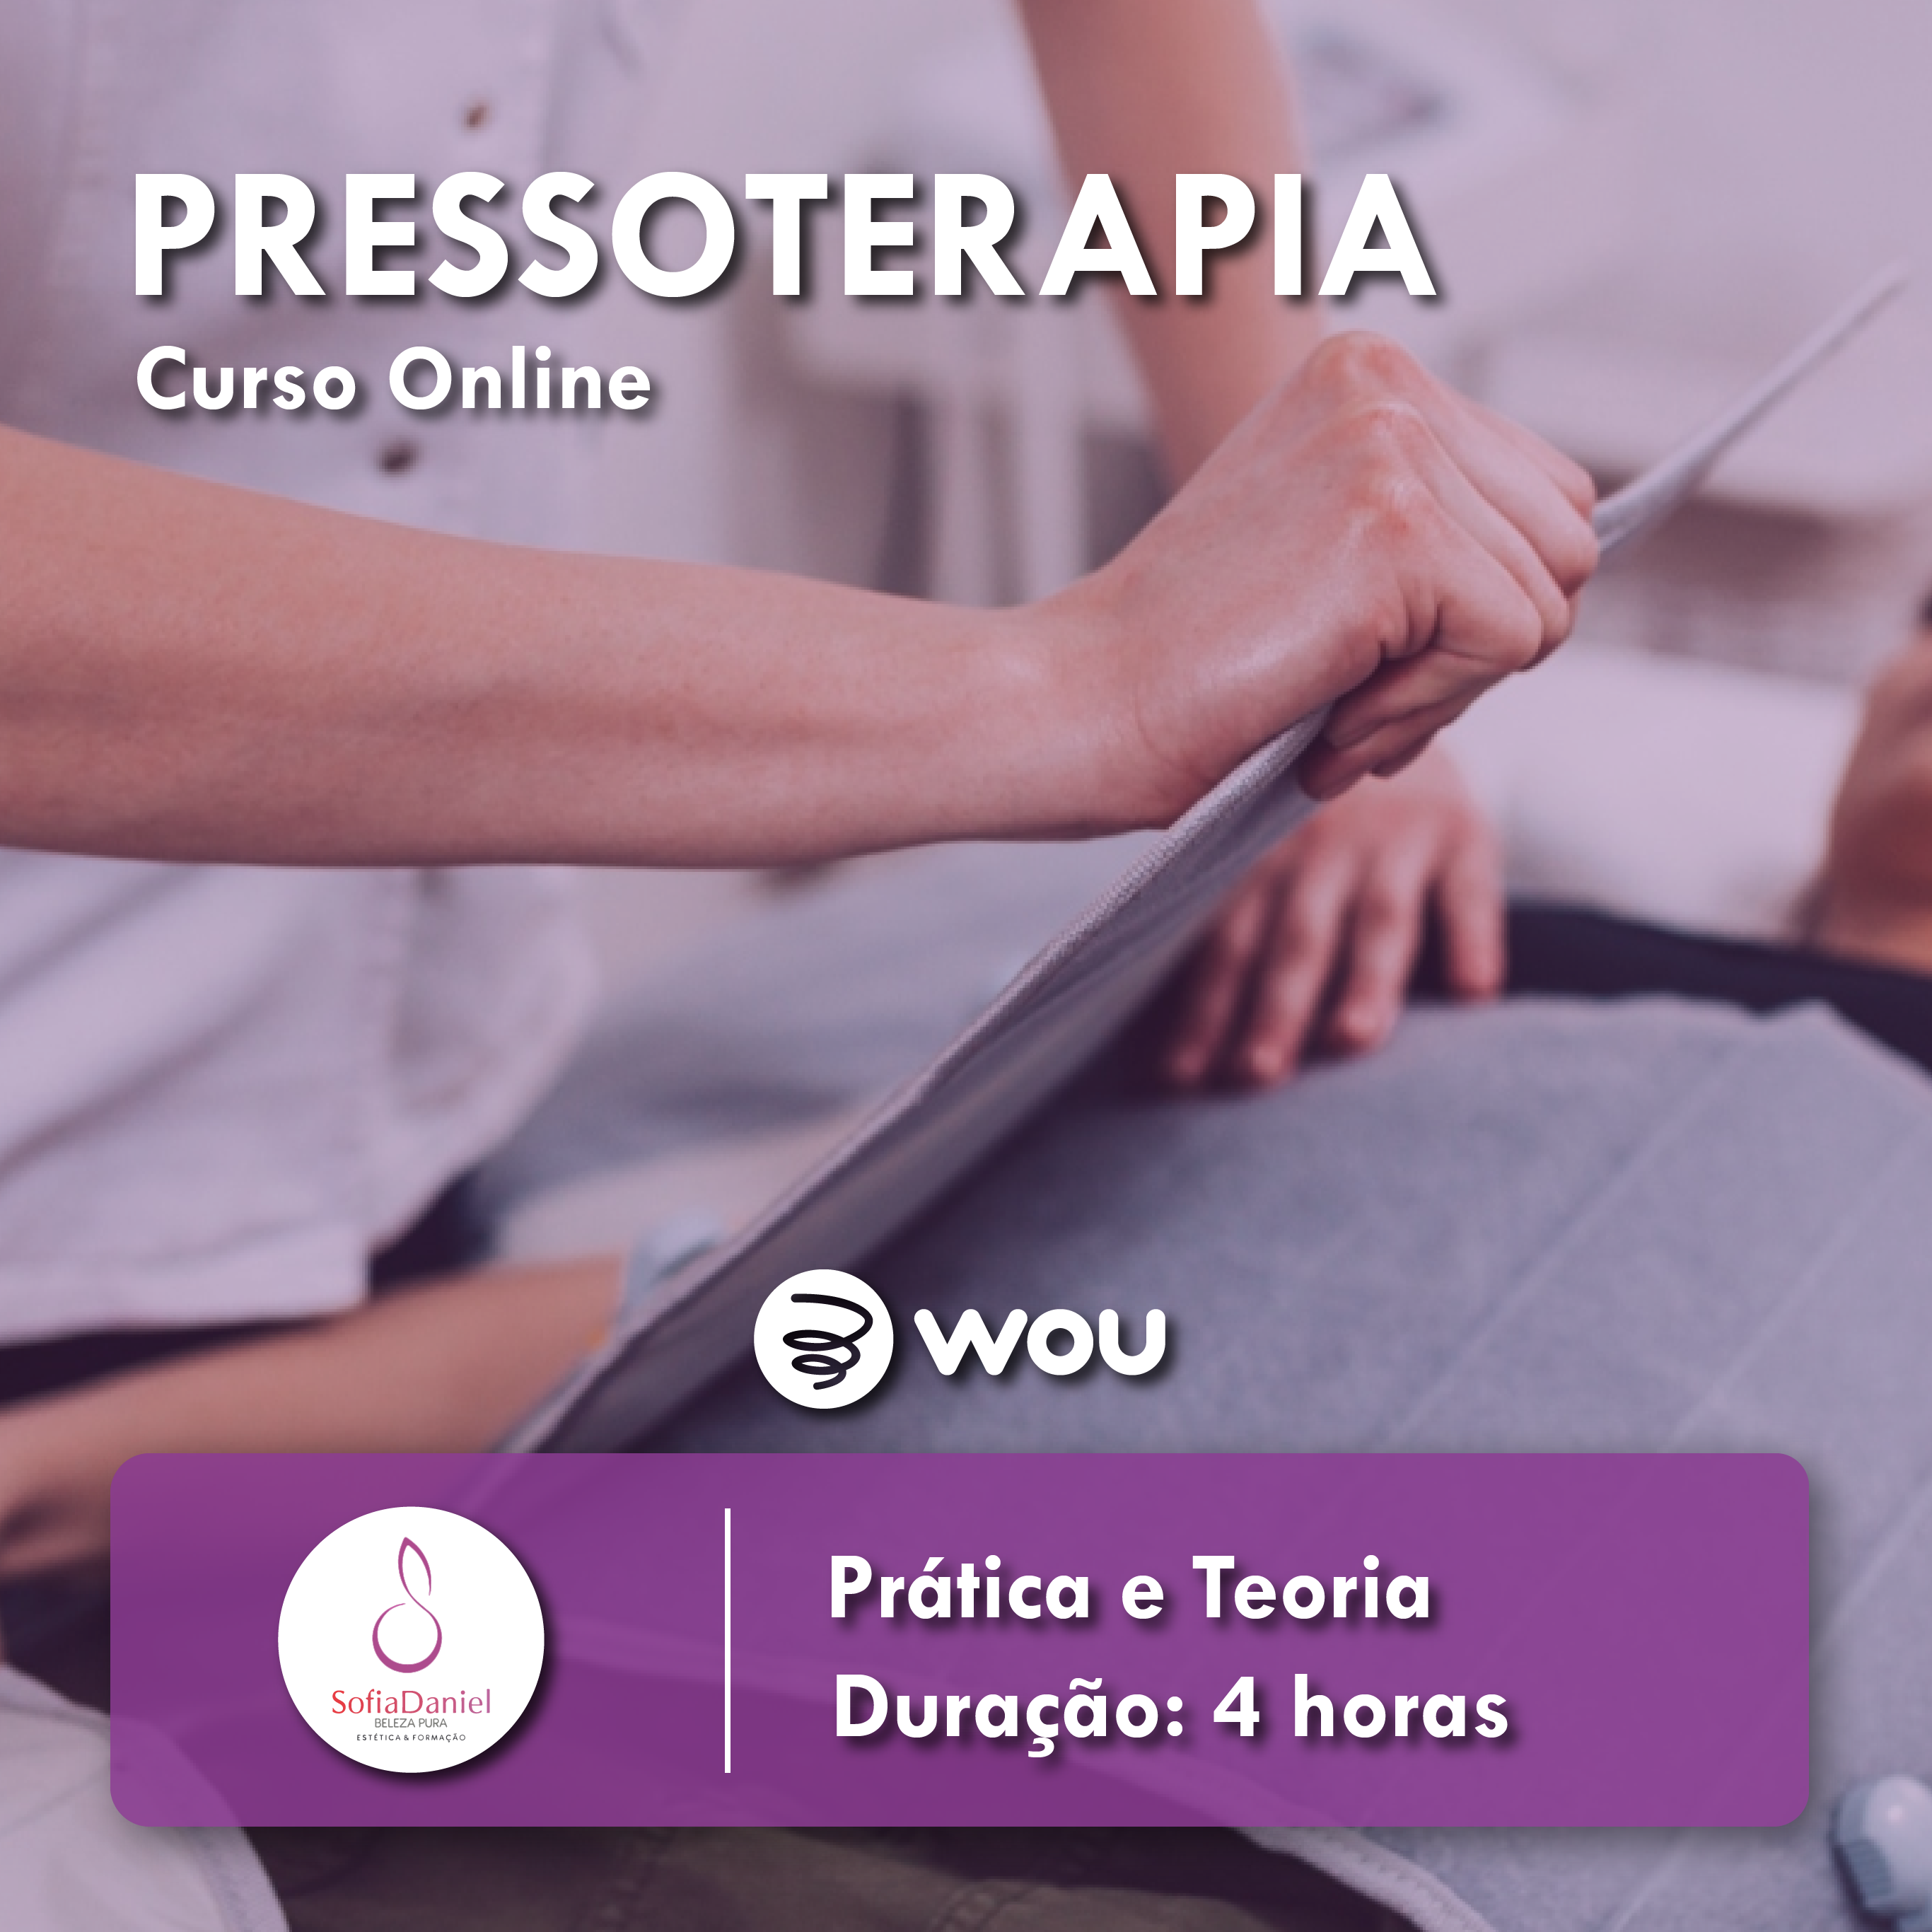 Online Pressotherapy Course